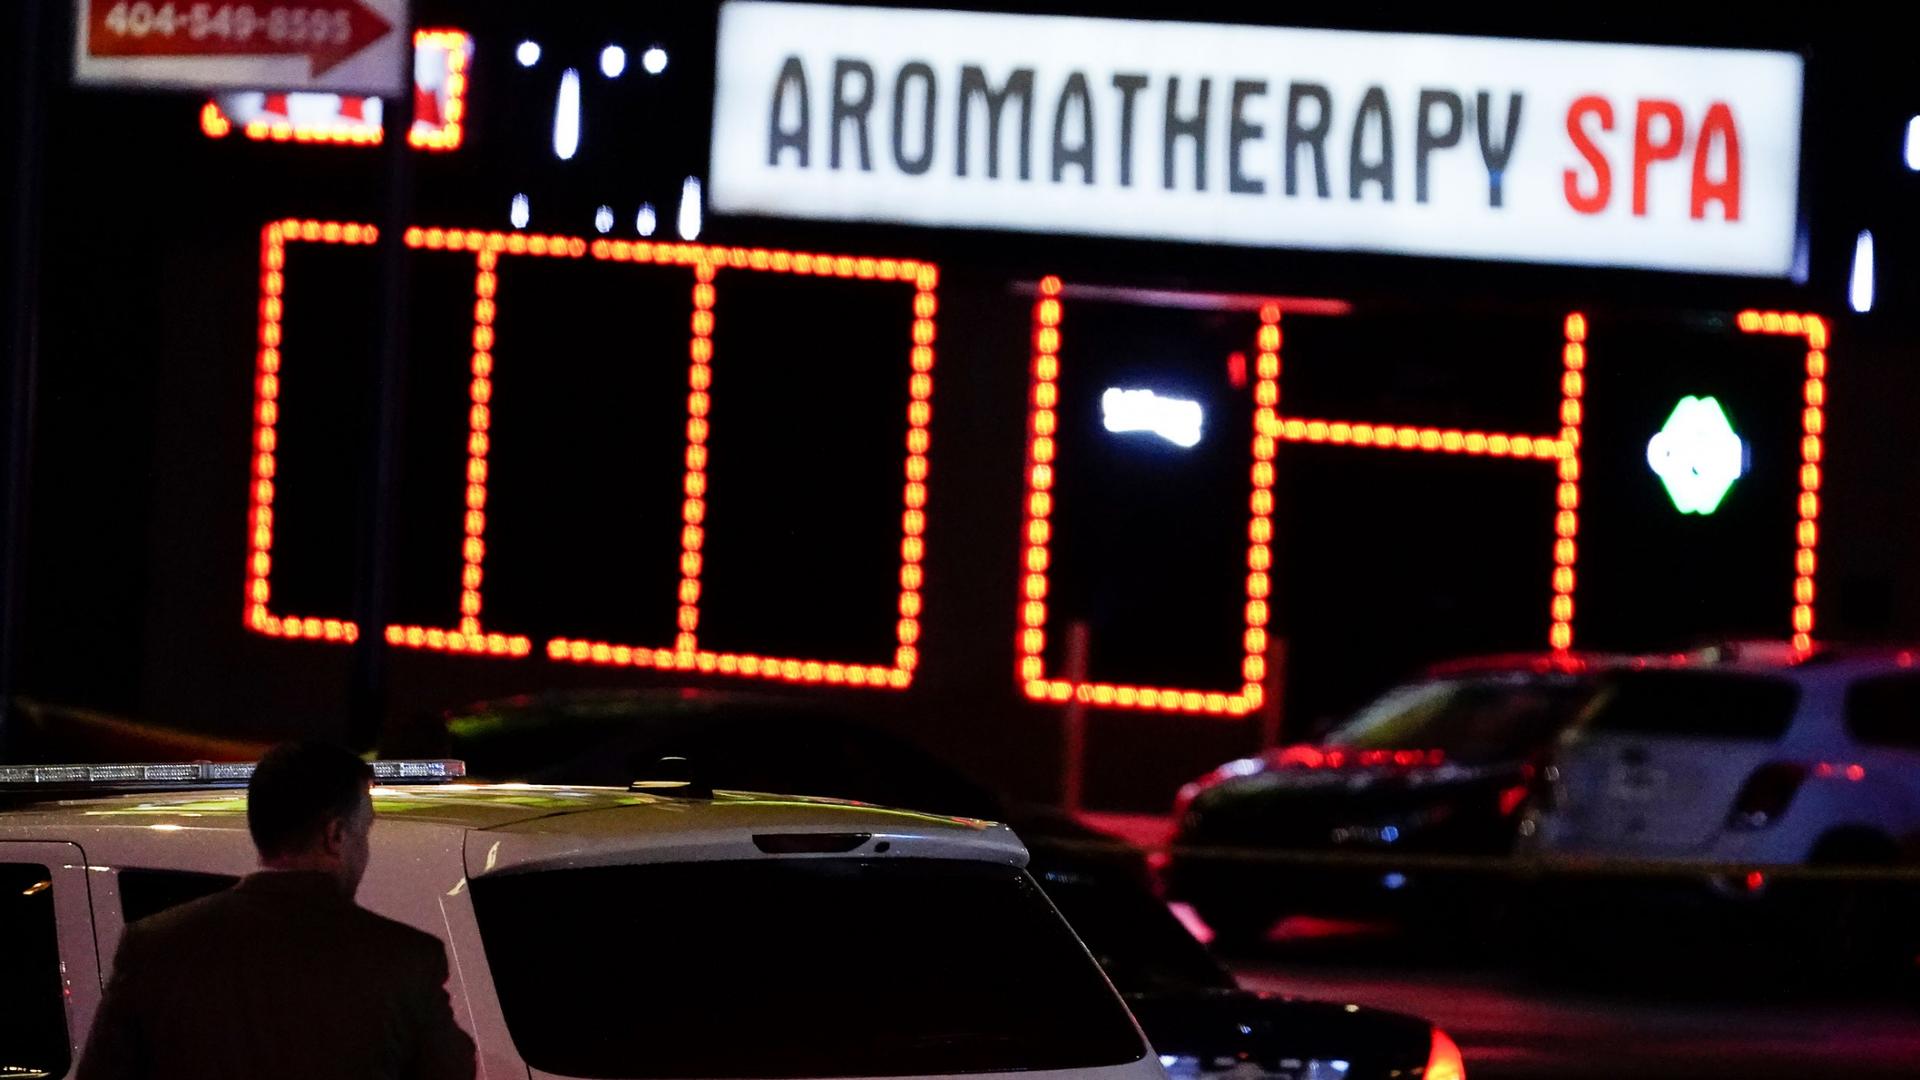 A police SUV is shown in the nearground with a bright white sign in the distance for an Aromatherapy spa.